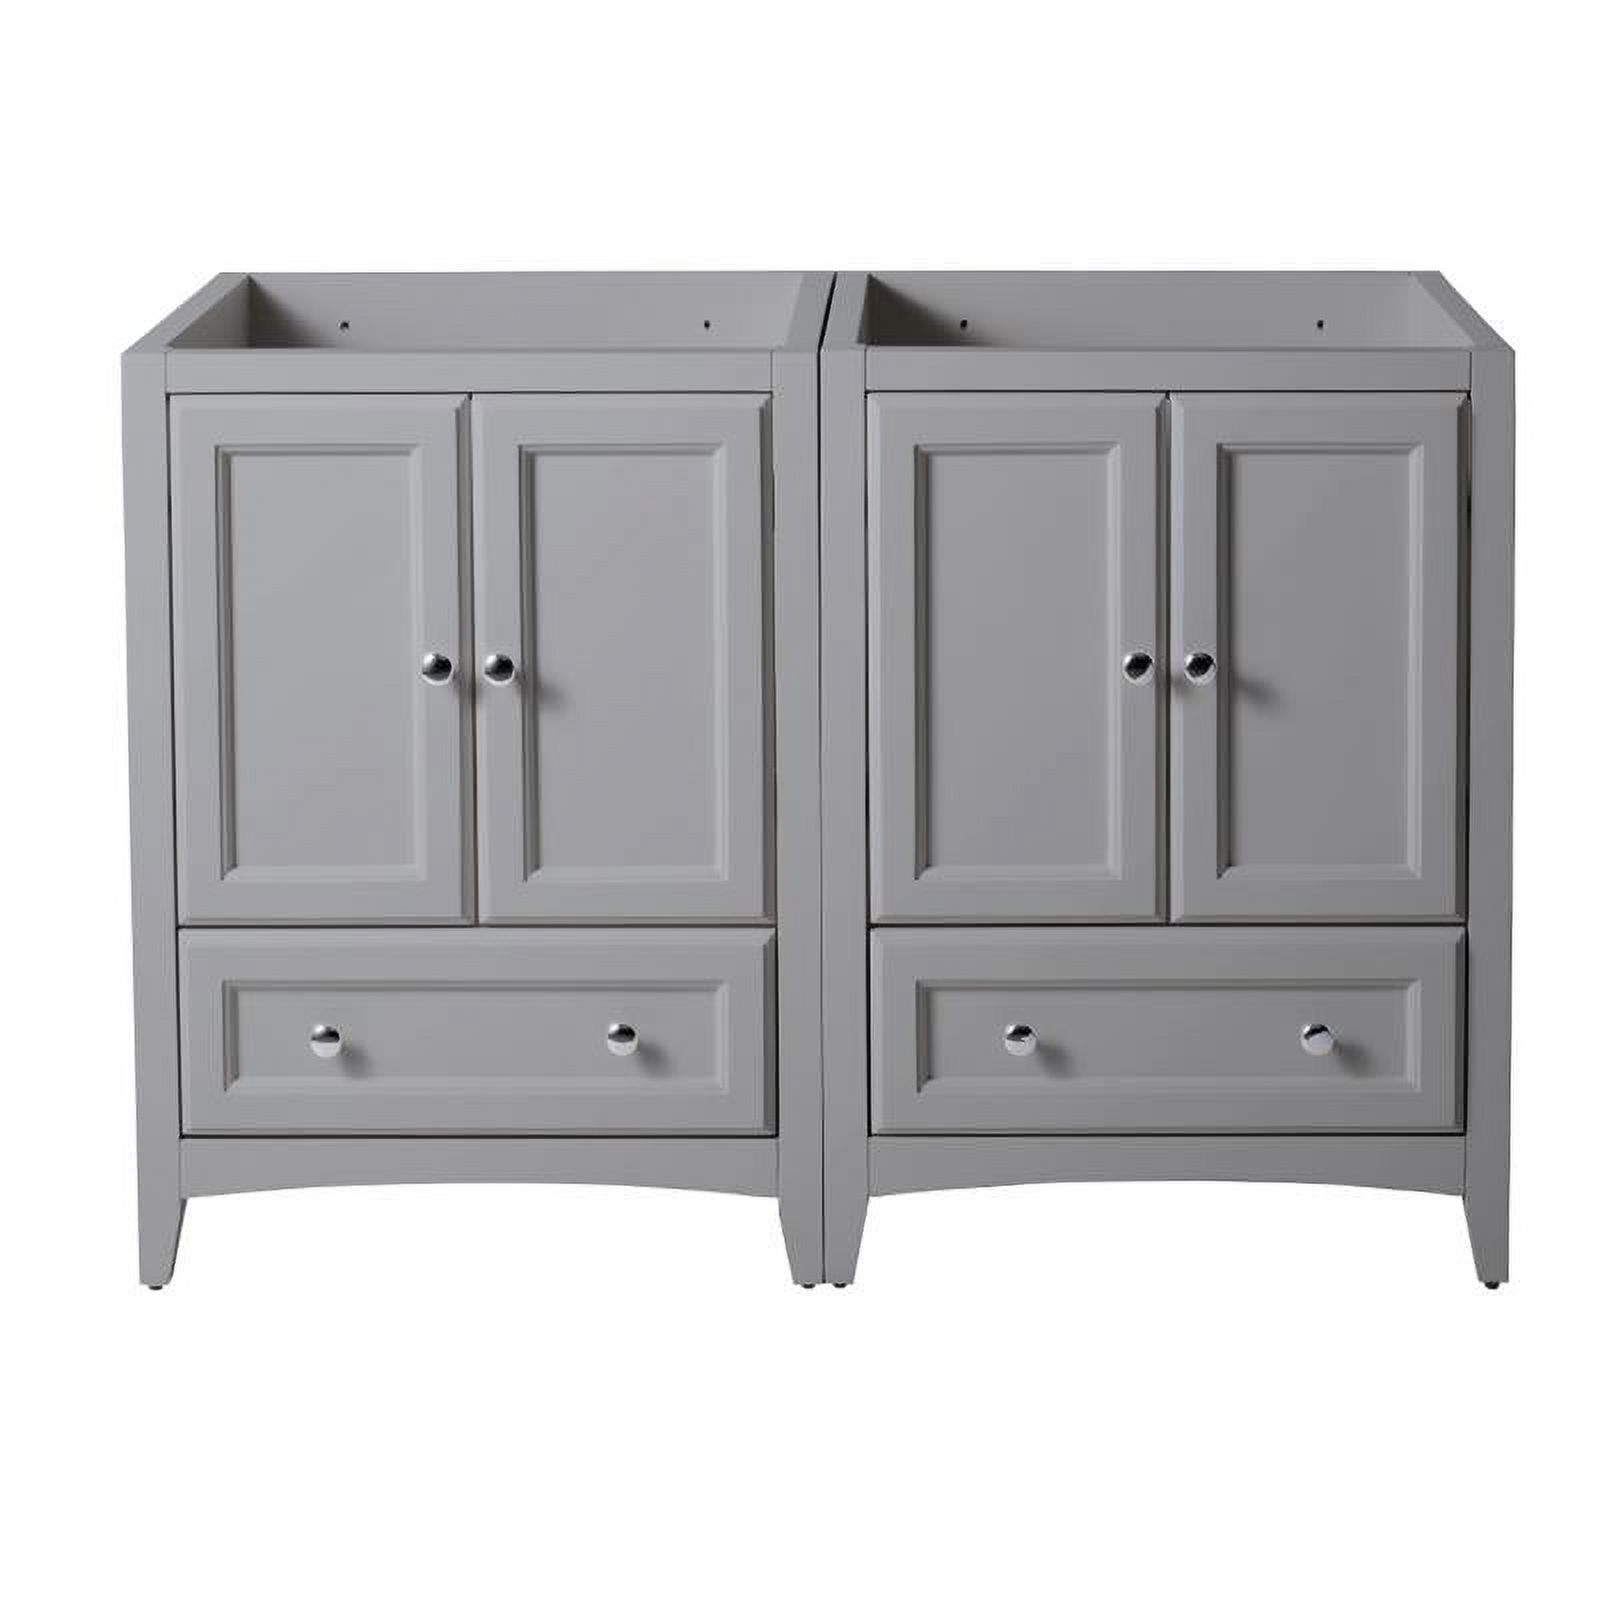 Fresca Oxford 48" Double Sinks Traditional Wood Bathroom Cabinet in Gray - image 2 of 4